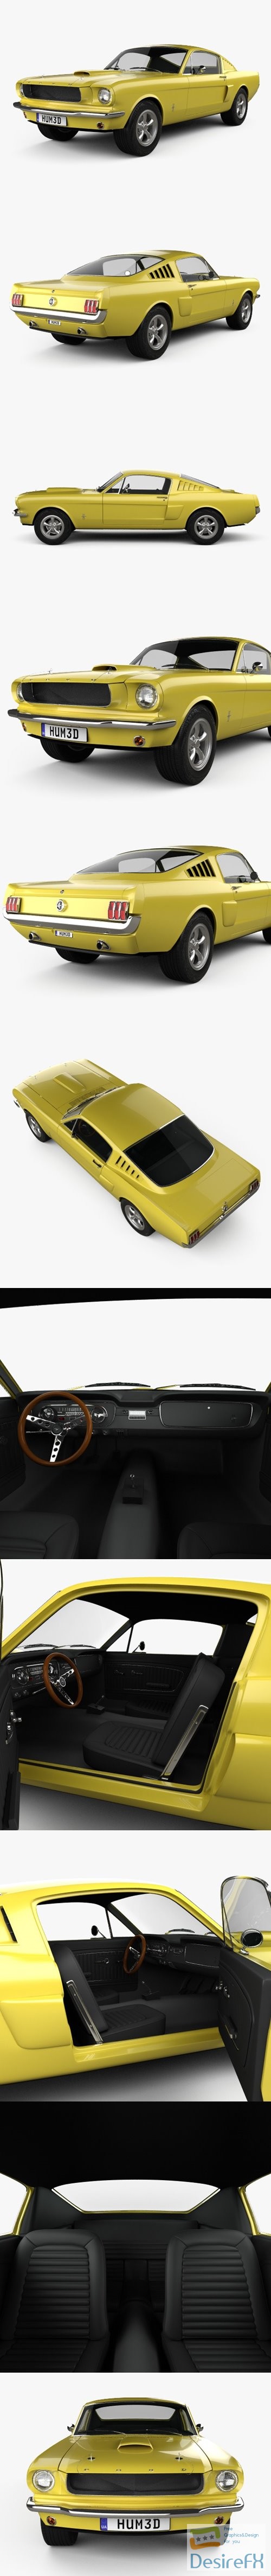 Ford Mustang Fastback with HQ interior 1965 3D Model